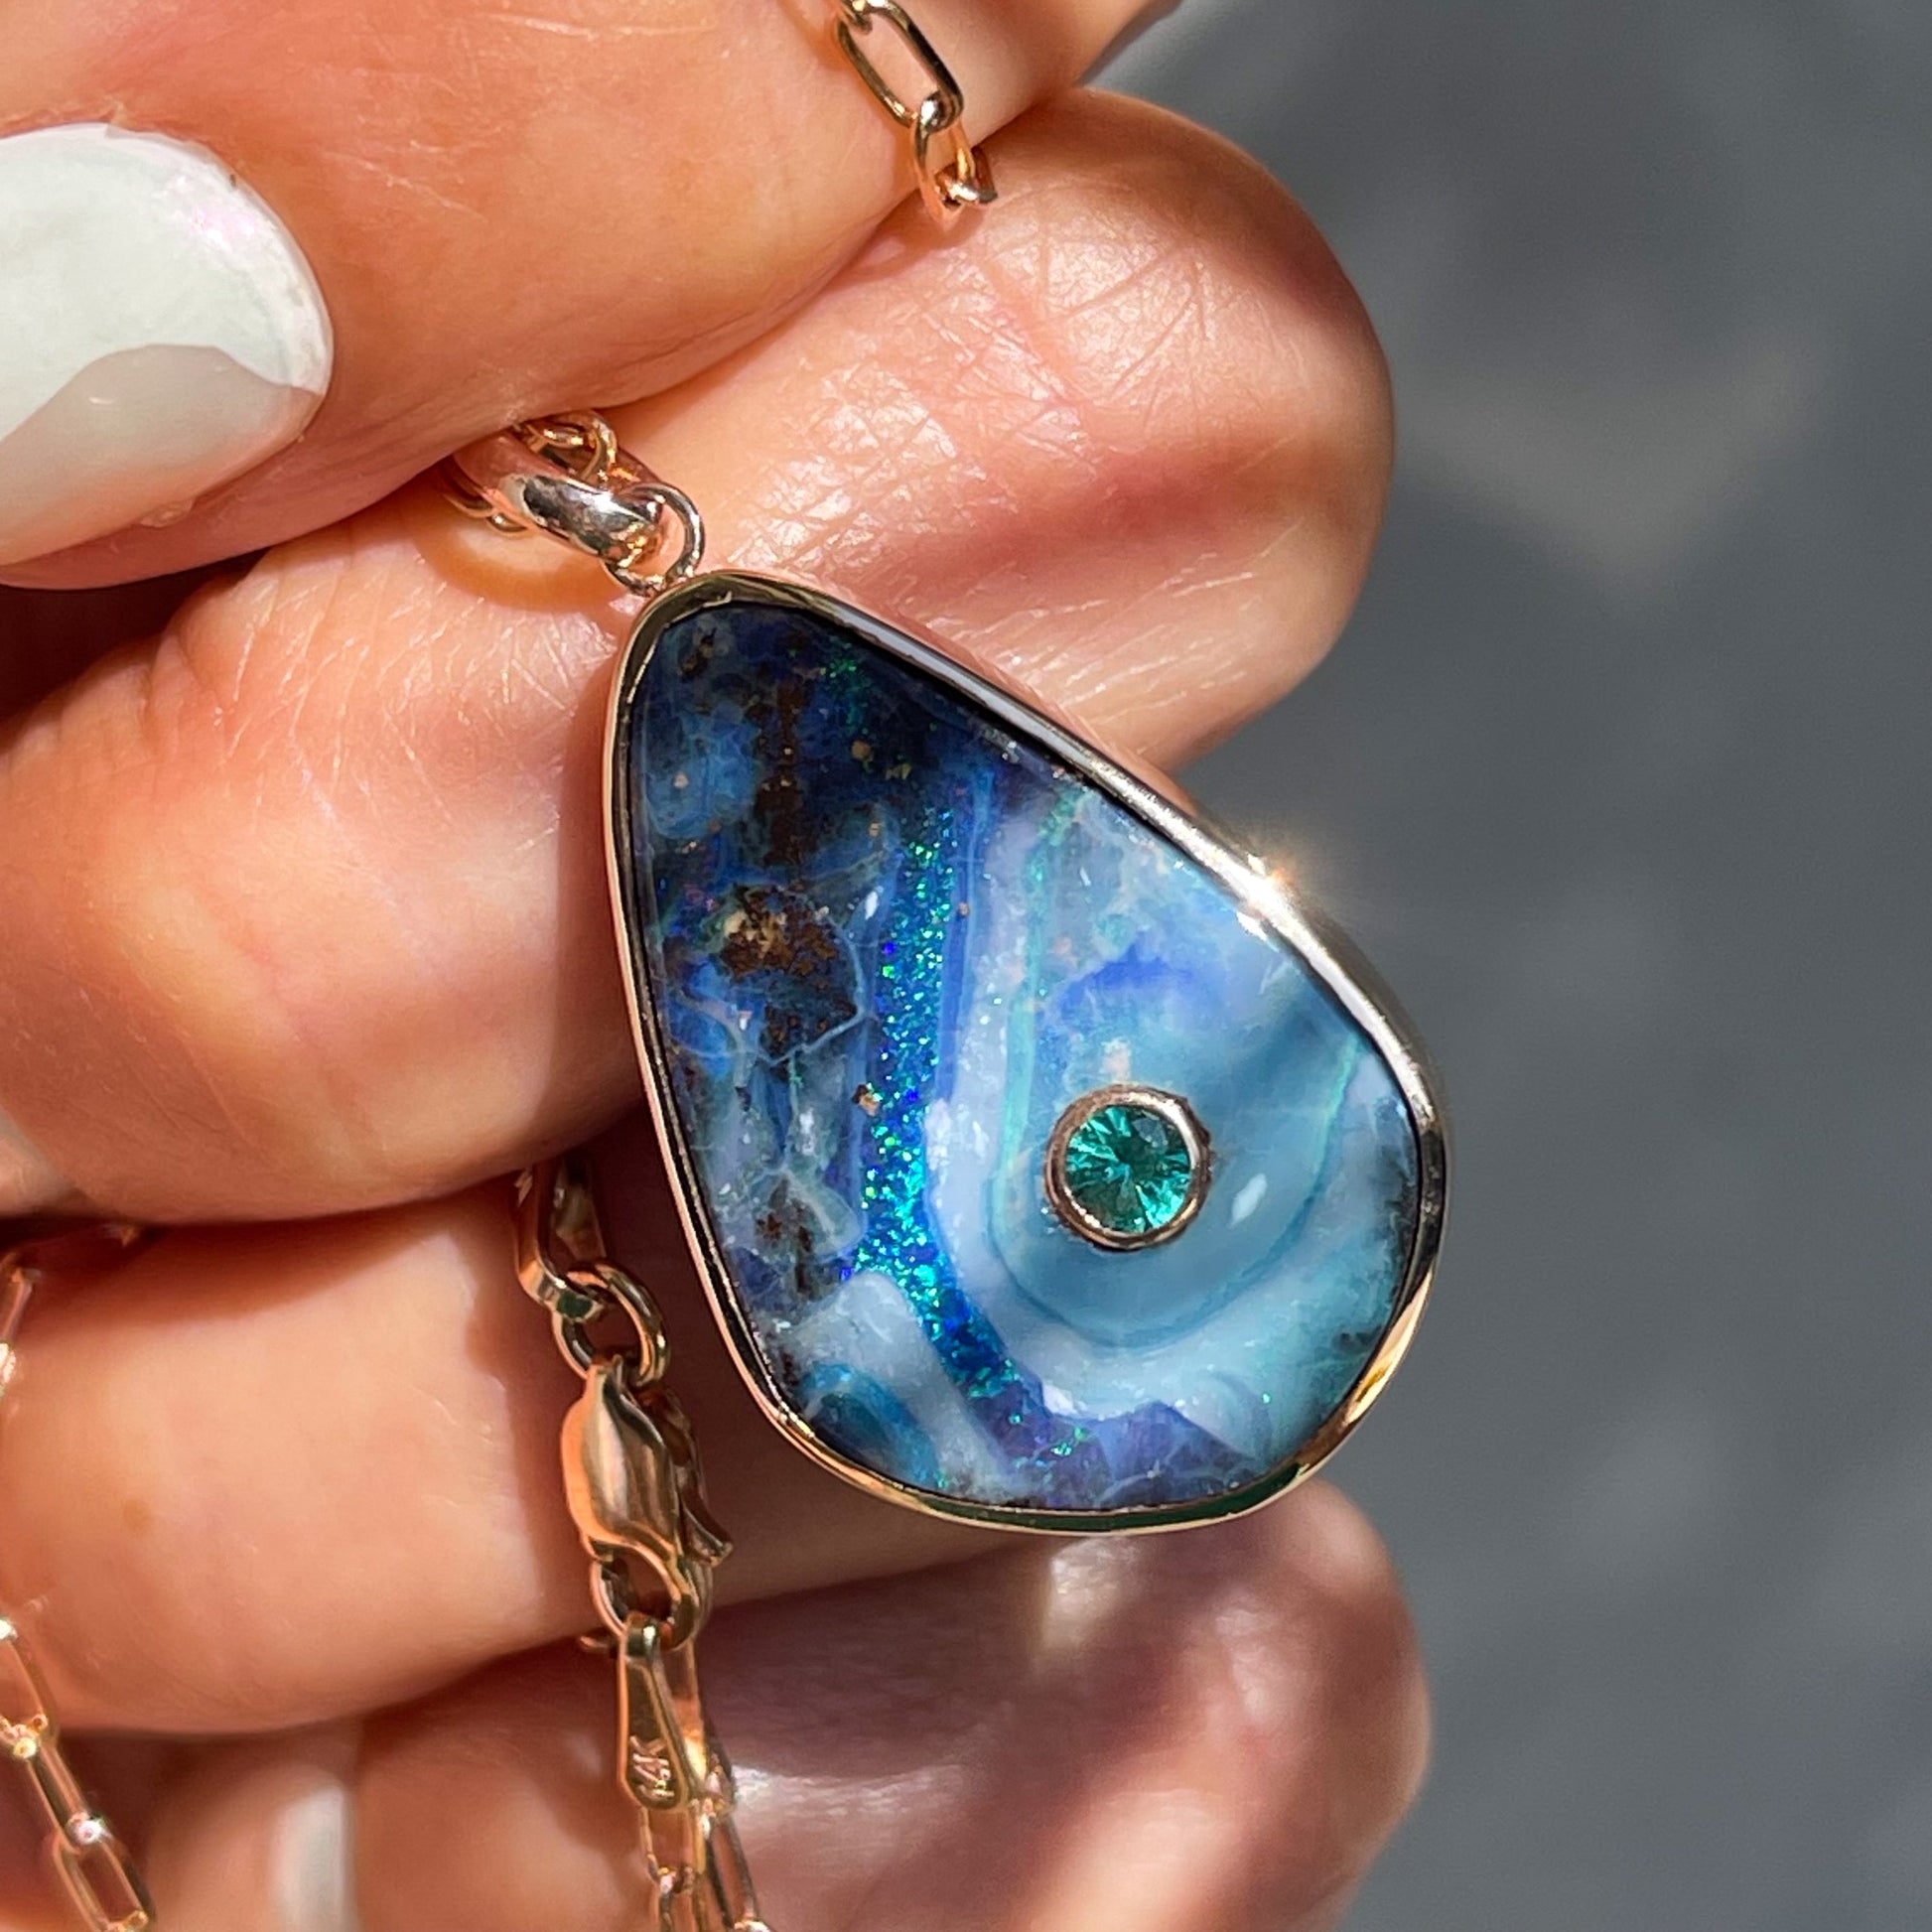 An Australian Opal Necklace by NIXIN Jewelry resting upon a hand. Available for purchase with other opal jewelry for sale at NIXINjewelry.com.